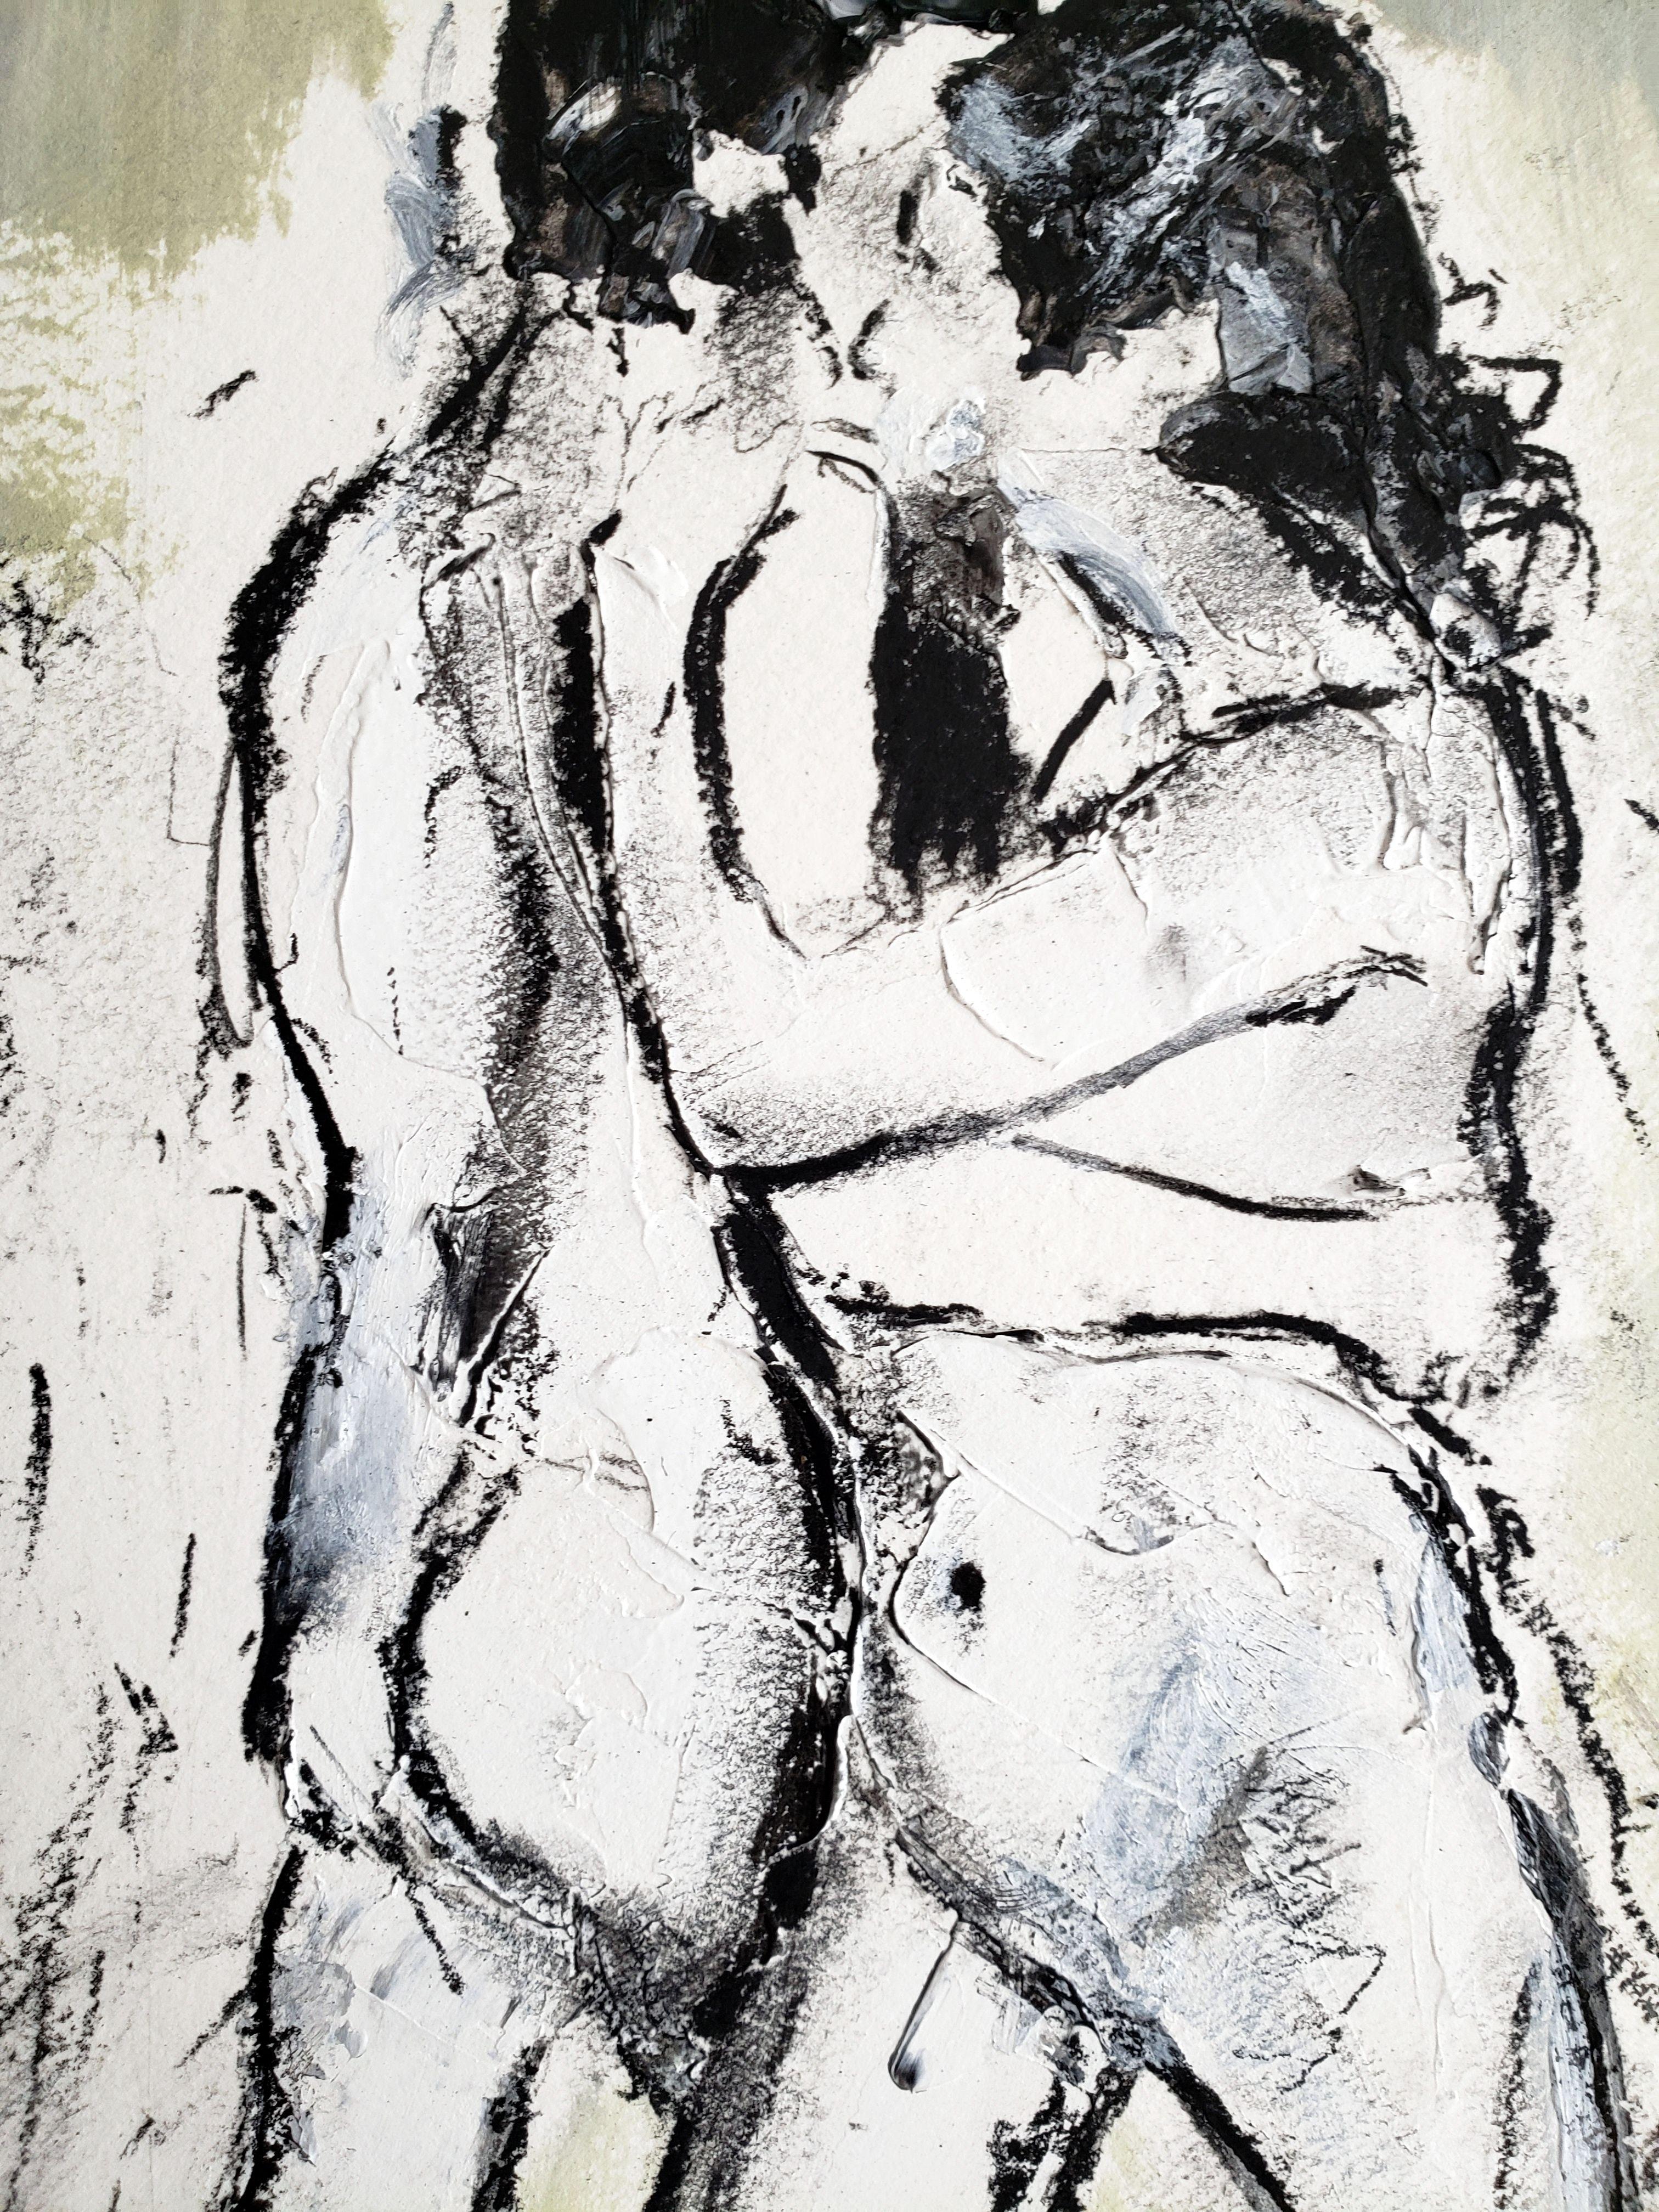 This is part of my new series of raw and emotive paintings that keep it simple but will make you feel something. They are painted on heavy duty fine art paper and look fantastic when matted and framed. This particular painting shows two nude people